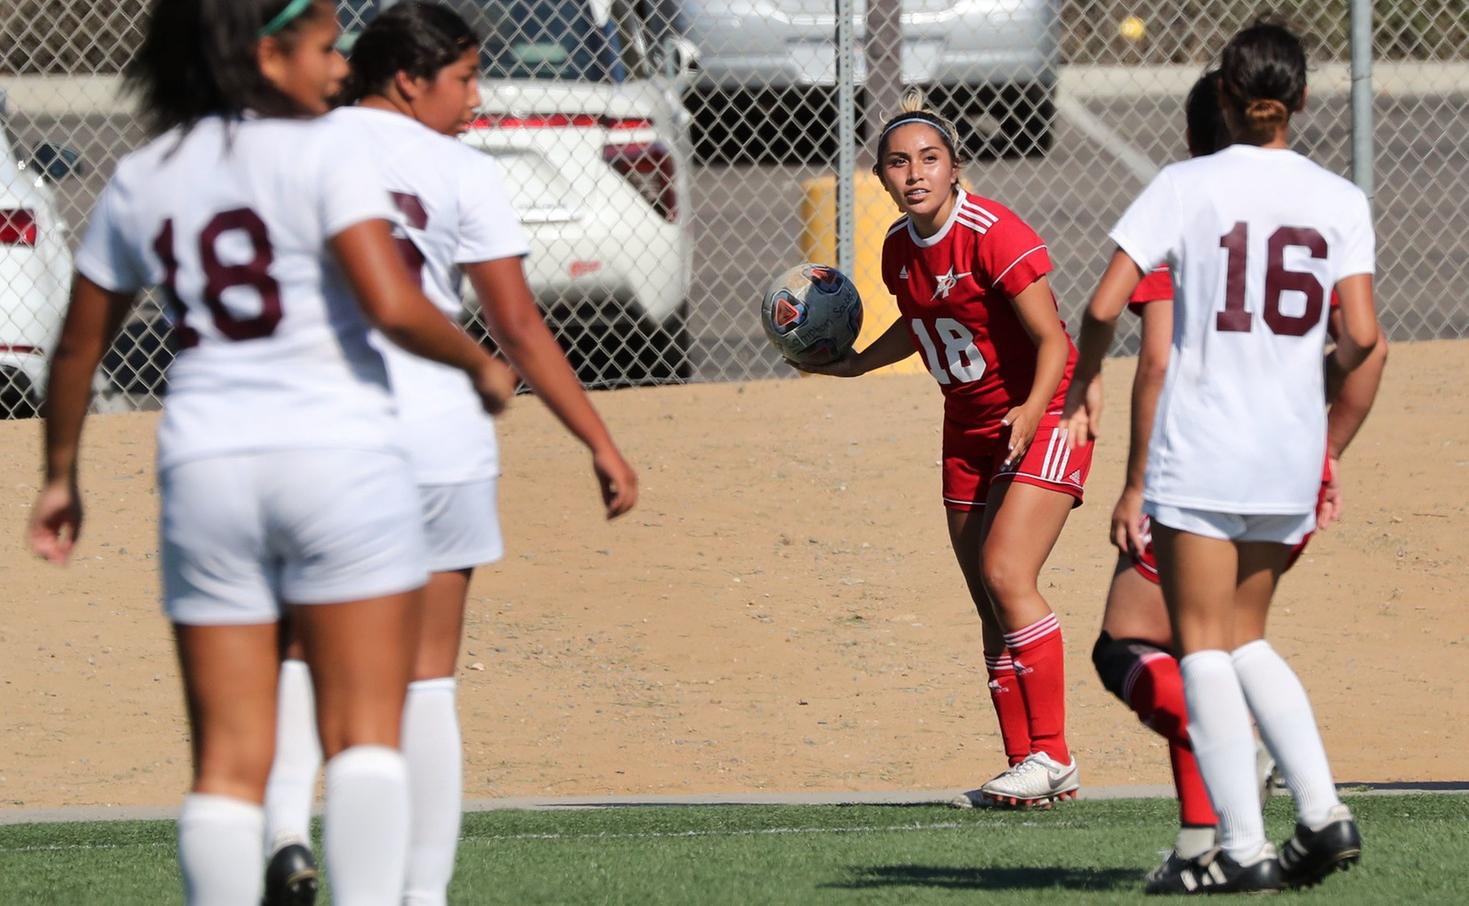 Valerie Hernandez scored the lone goal for the Comets late in the second half. Photo by Hugh Cox (taken 9/3).